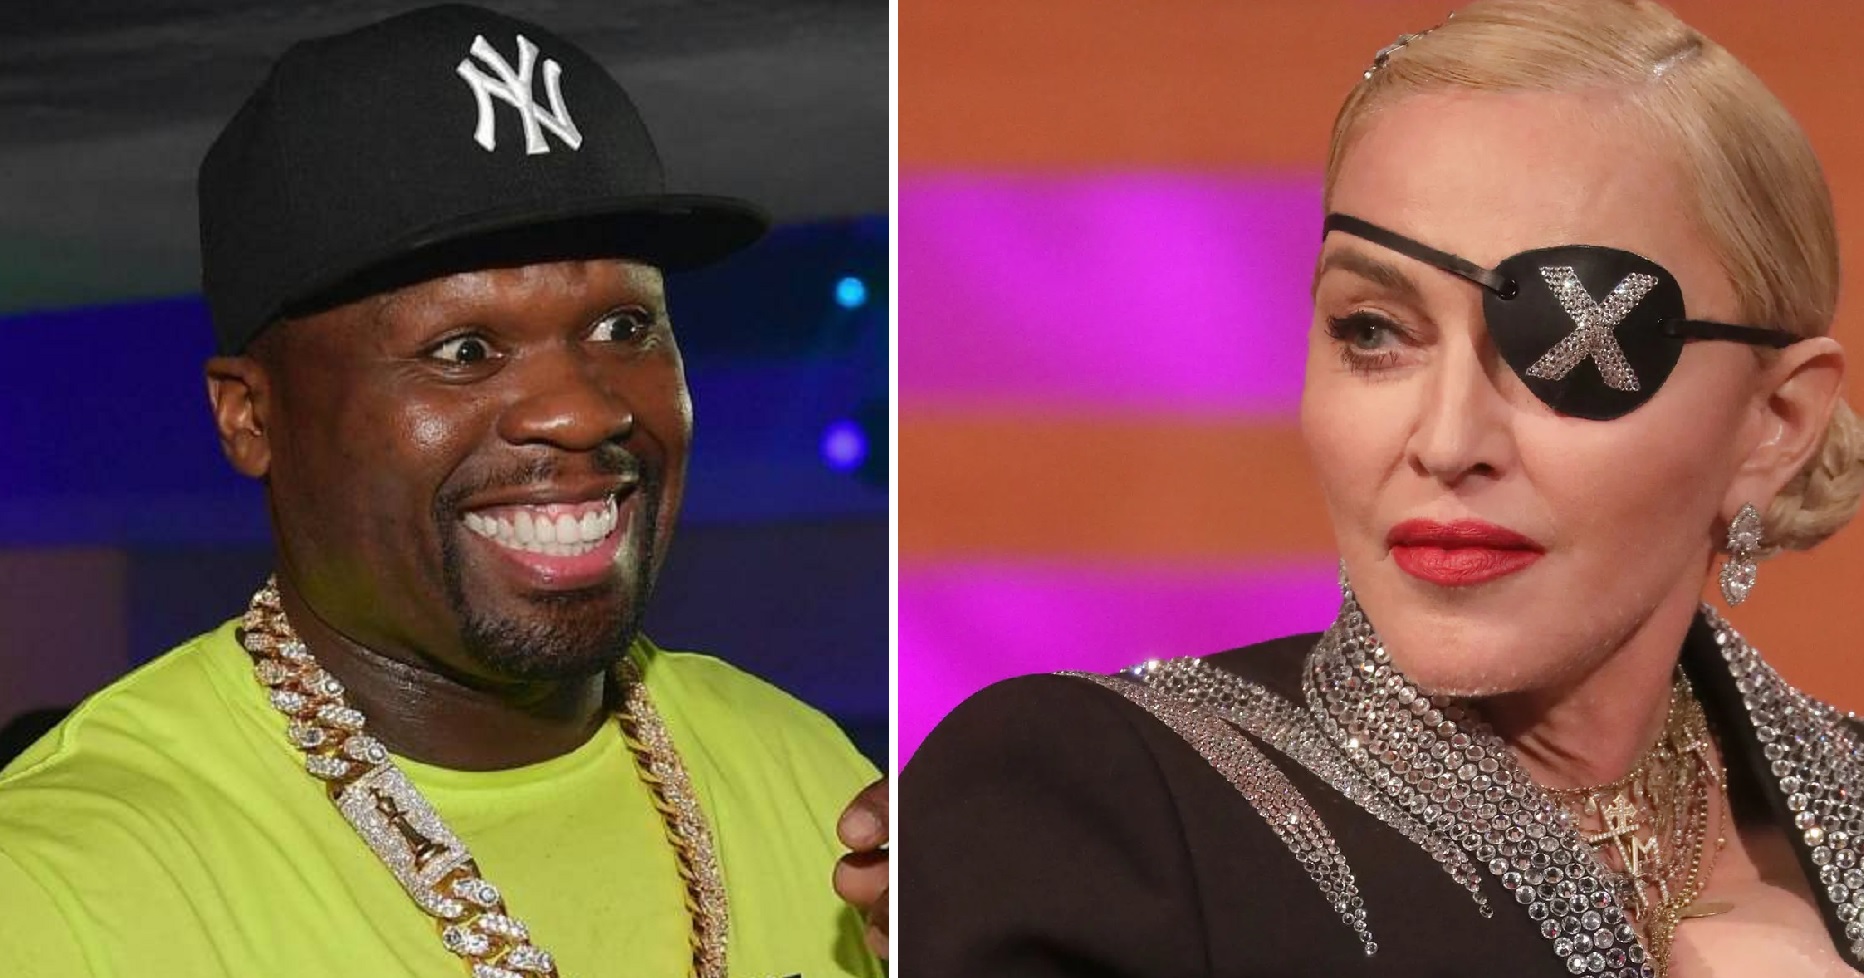 50 Cent Trolls Madonna, Then Apologizes, She Refuses The Apology, Then He Trolls Her Some More!